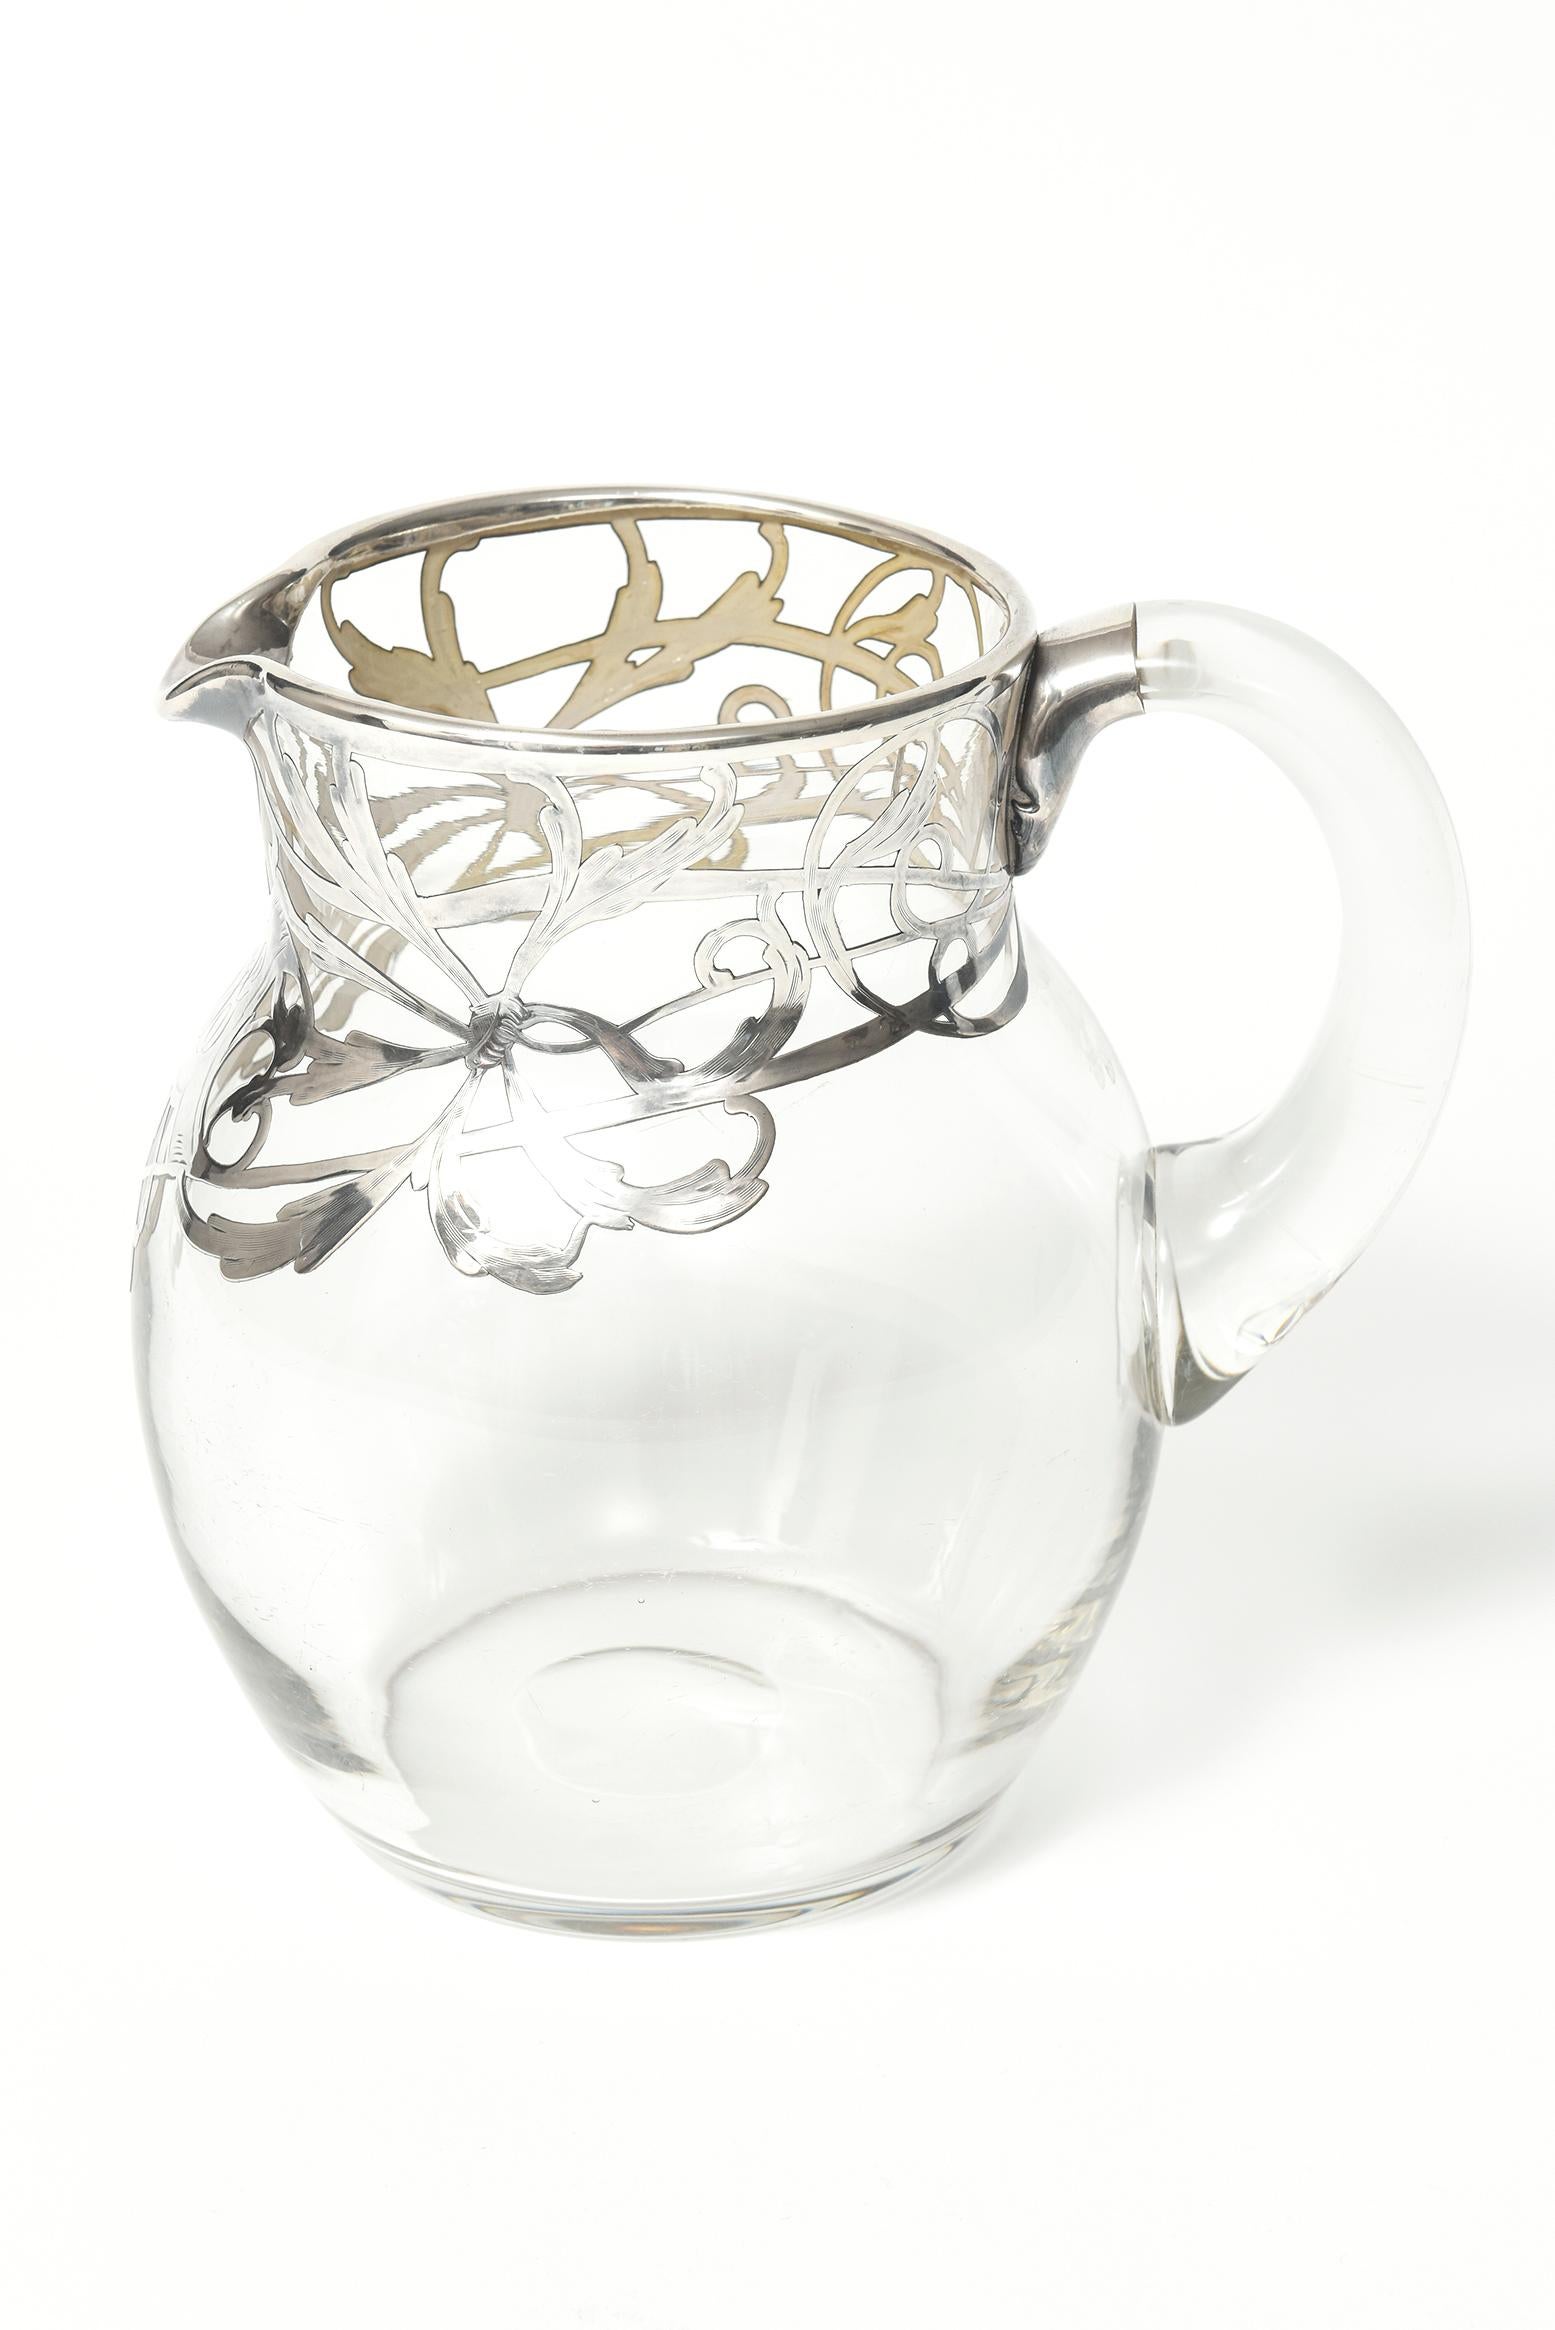 Beautifully made Art Nouveau water or lemonade pitcher with a sterling silver flowing vine design. The area below the spout has a plaque with initials. Initials say SJG or LJG.

No marks on the pitcher.